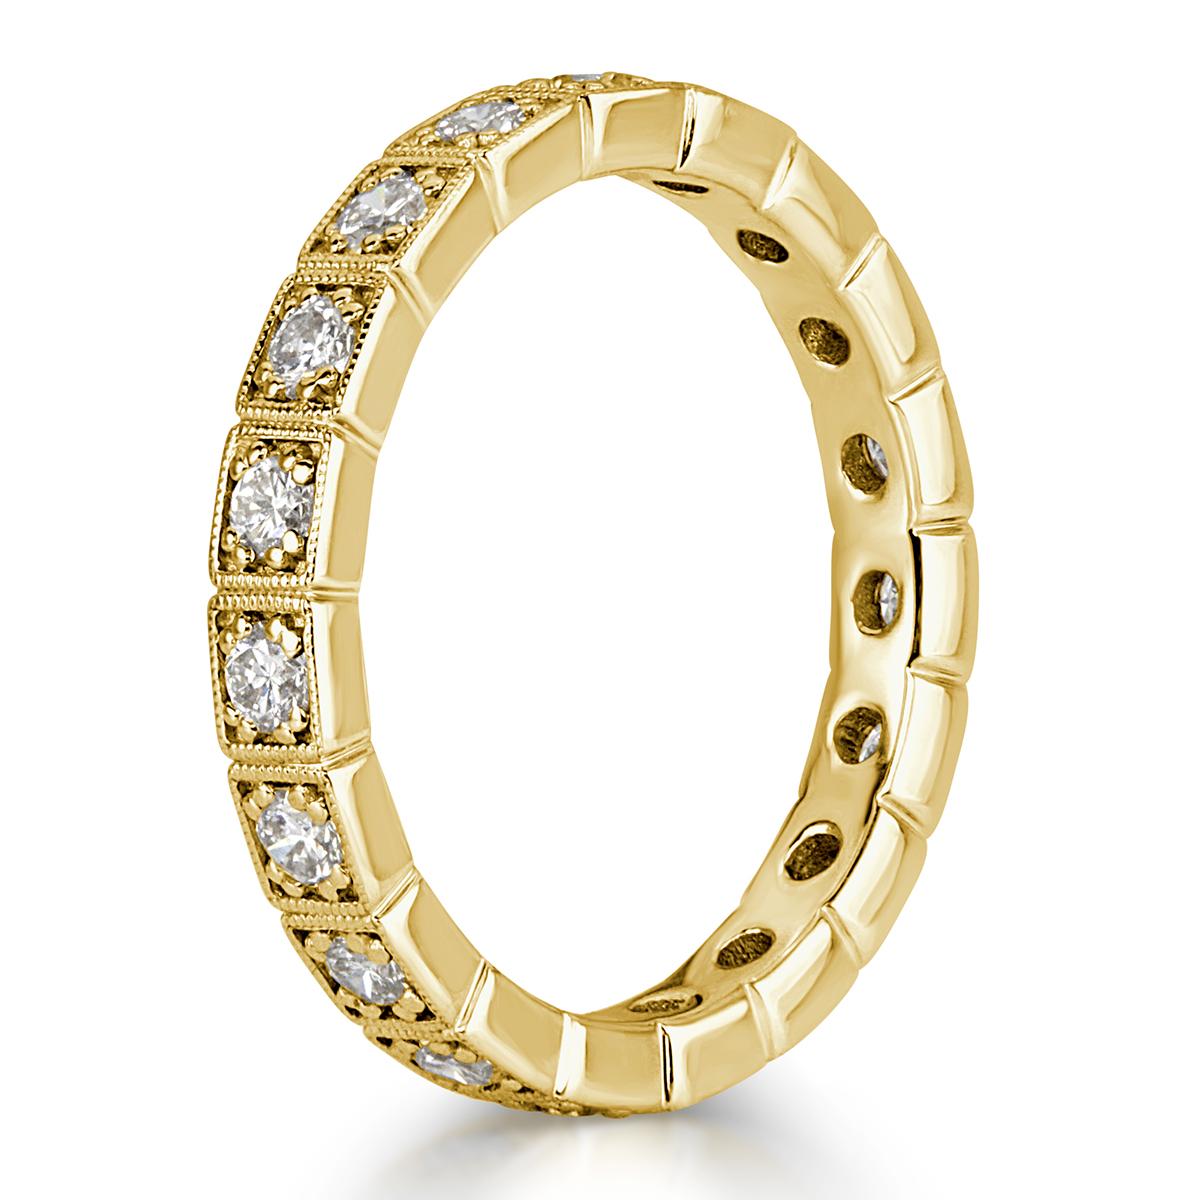 This exquisite diamond eternity band showcases 0.80ct of round brilliant cut diamonds bezel set to perfection in an 18k yellow gold, vintage setting style featuring delicate milgrain detail throughout, measuring at 2.9mm. The diamonds total 0.80ct